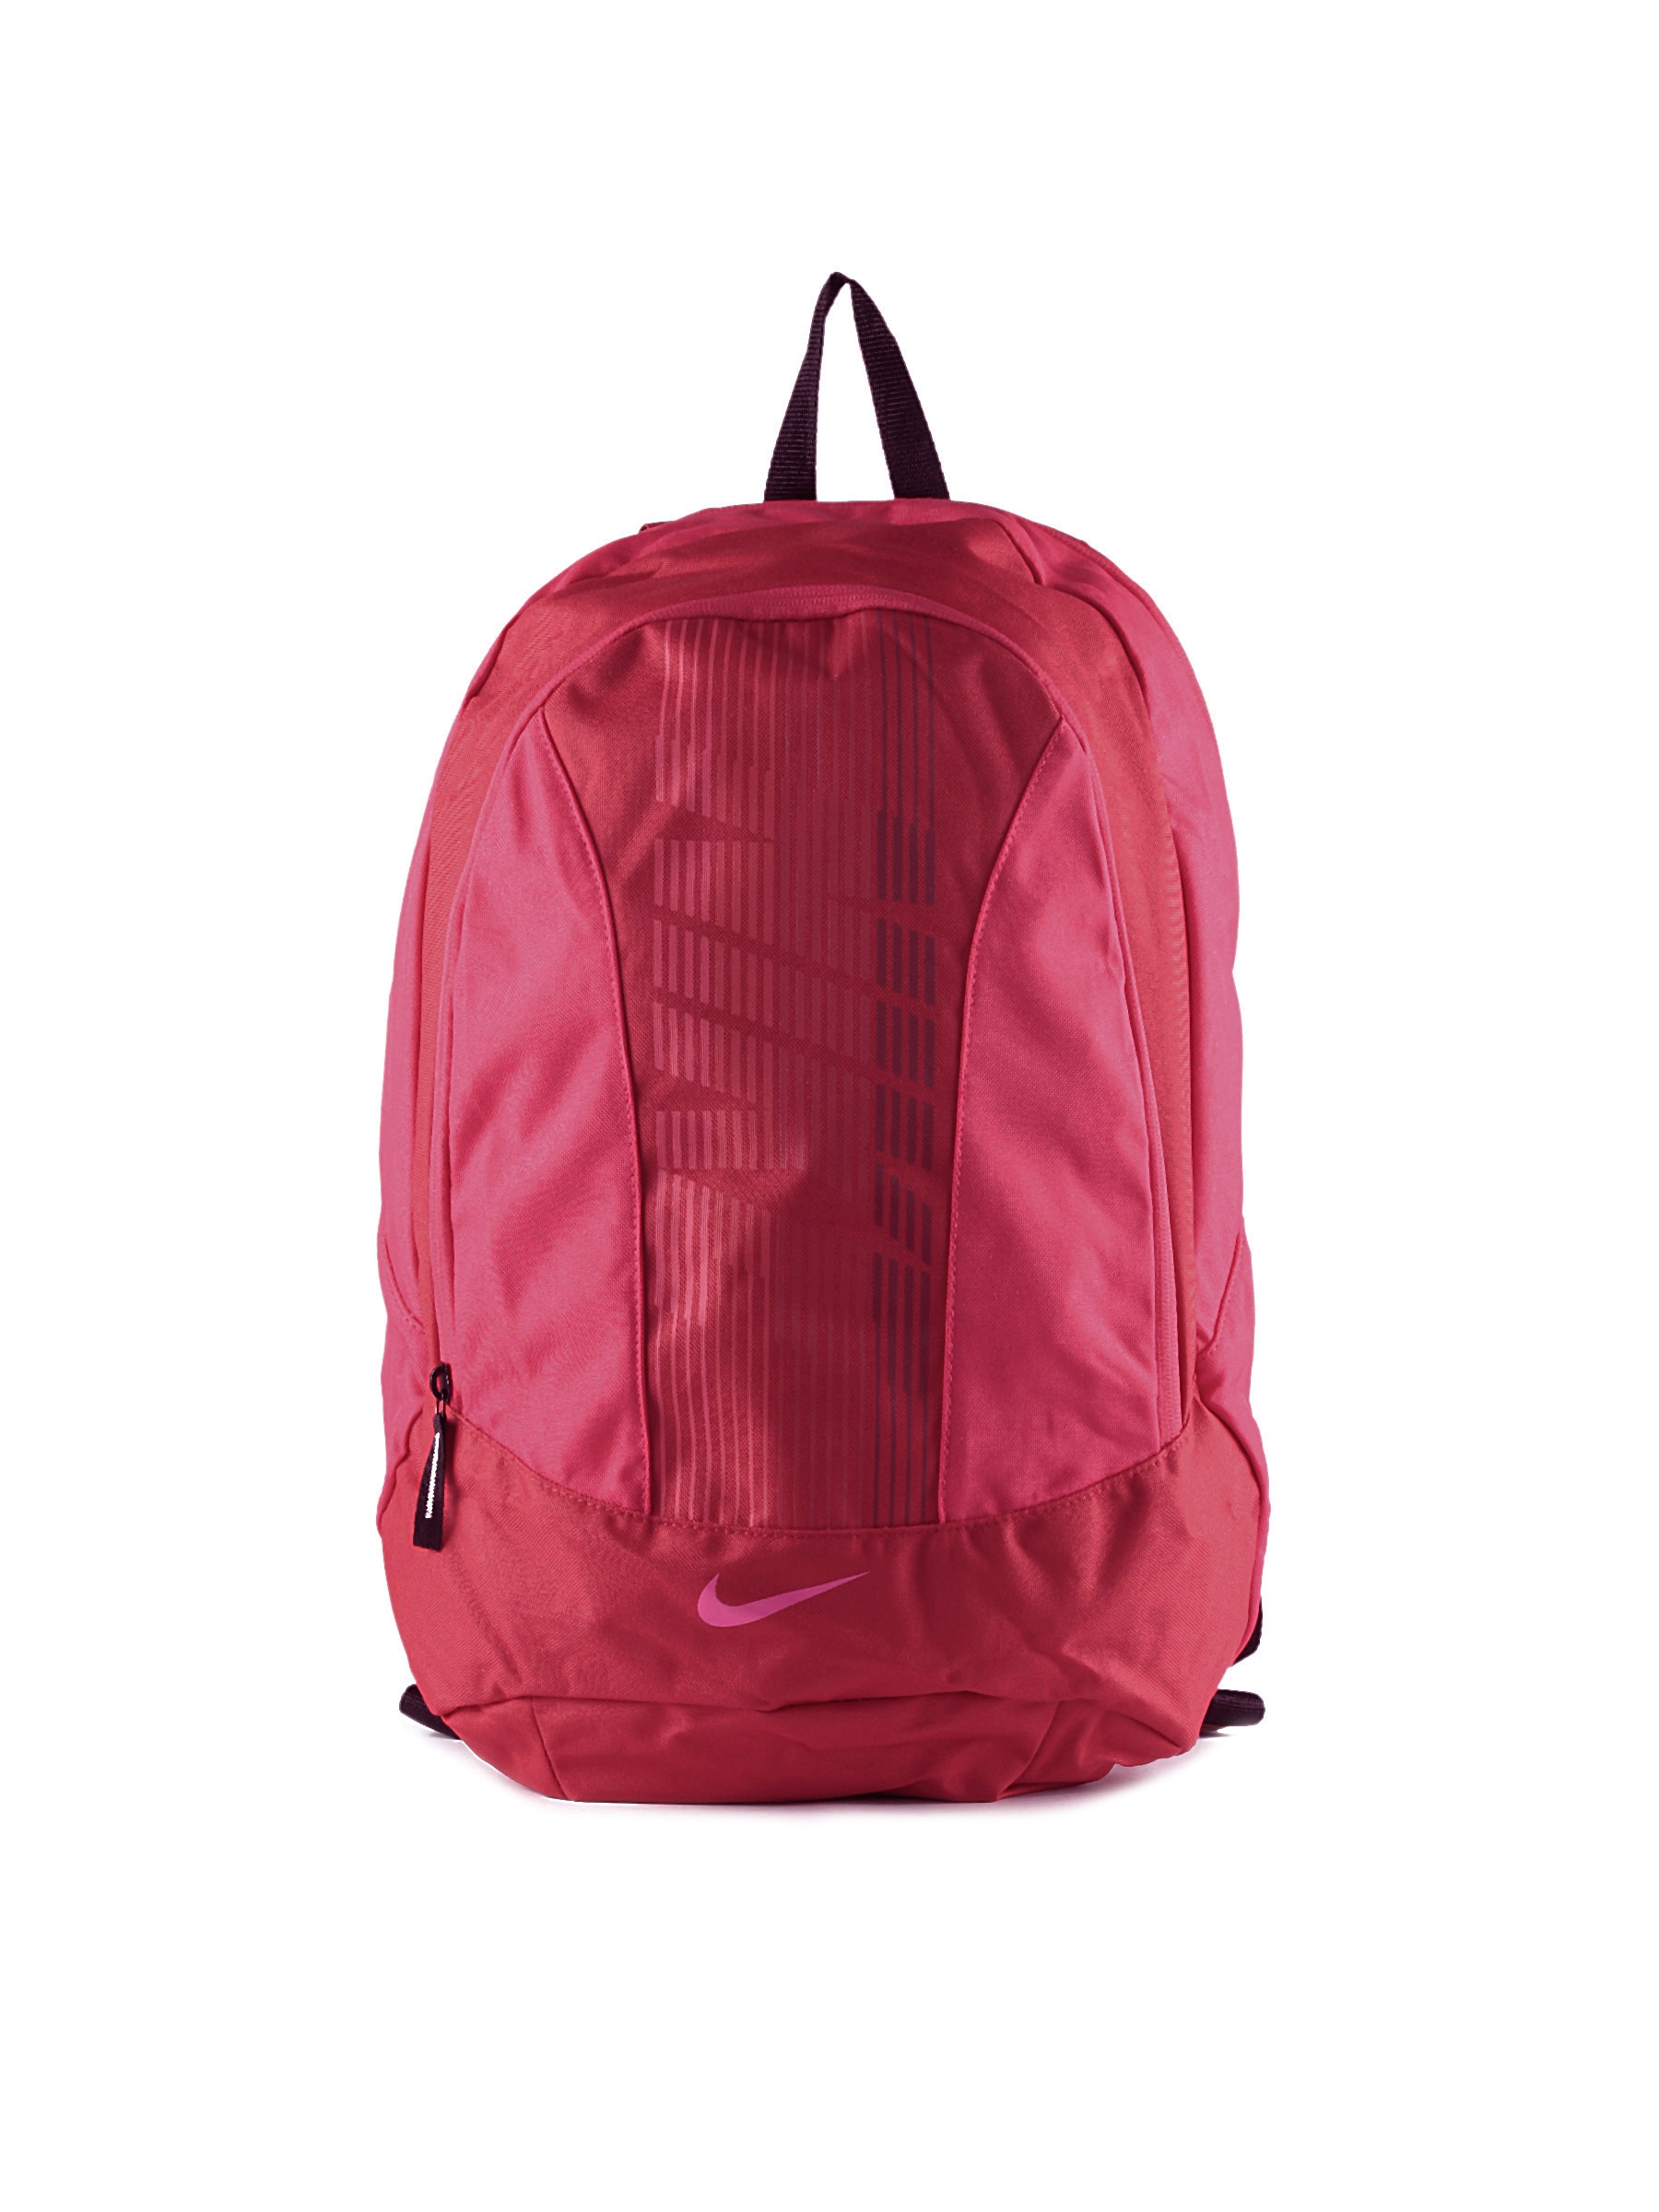 Nike Unisex Graphic North Classic Red Backpack